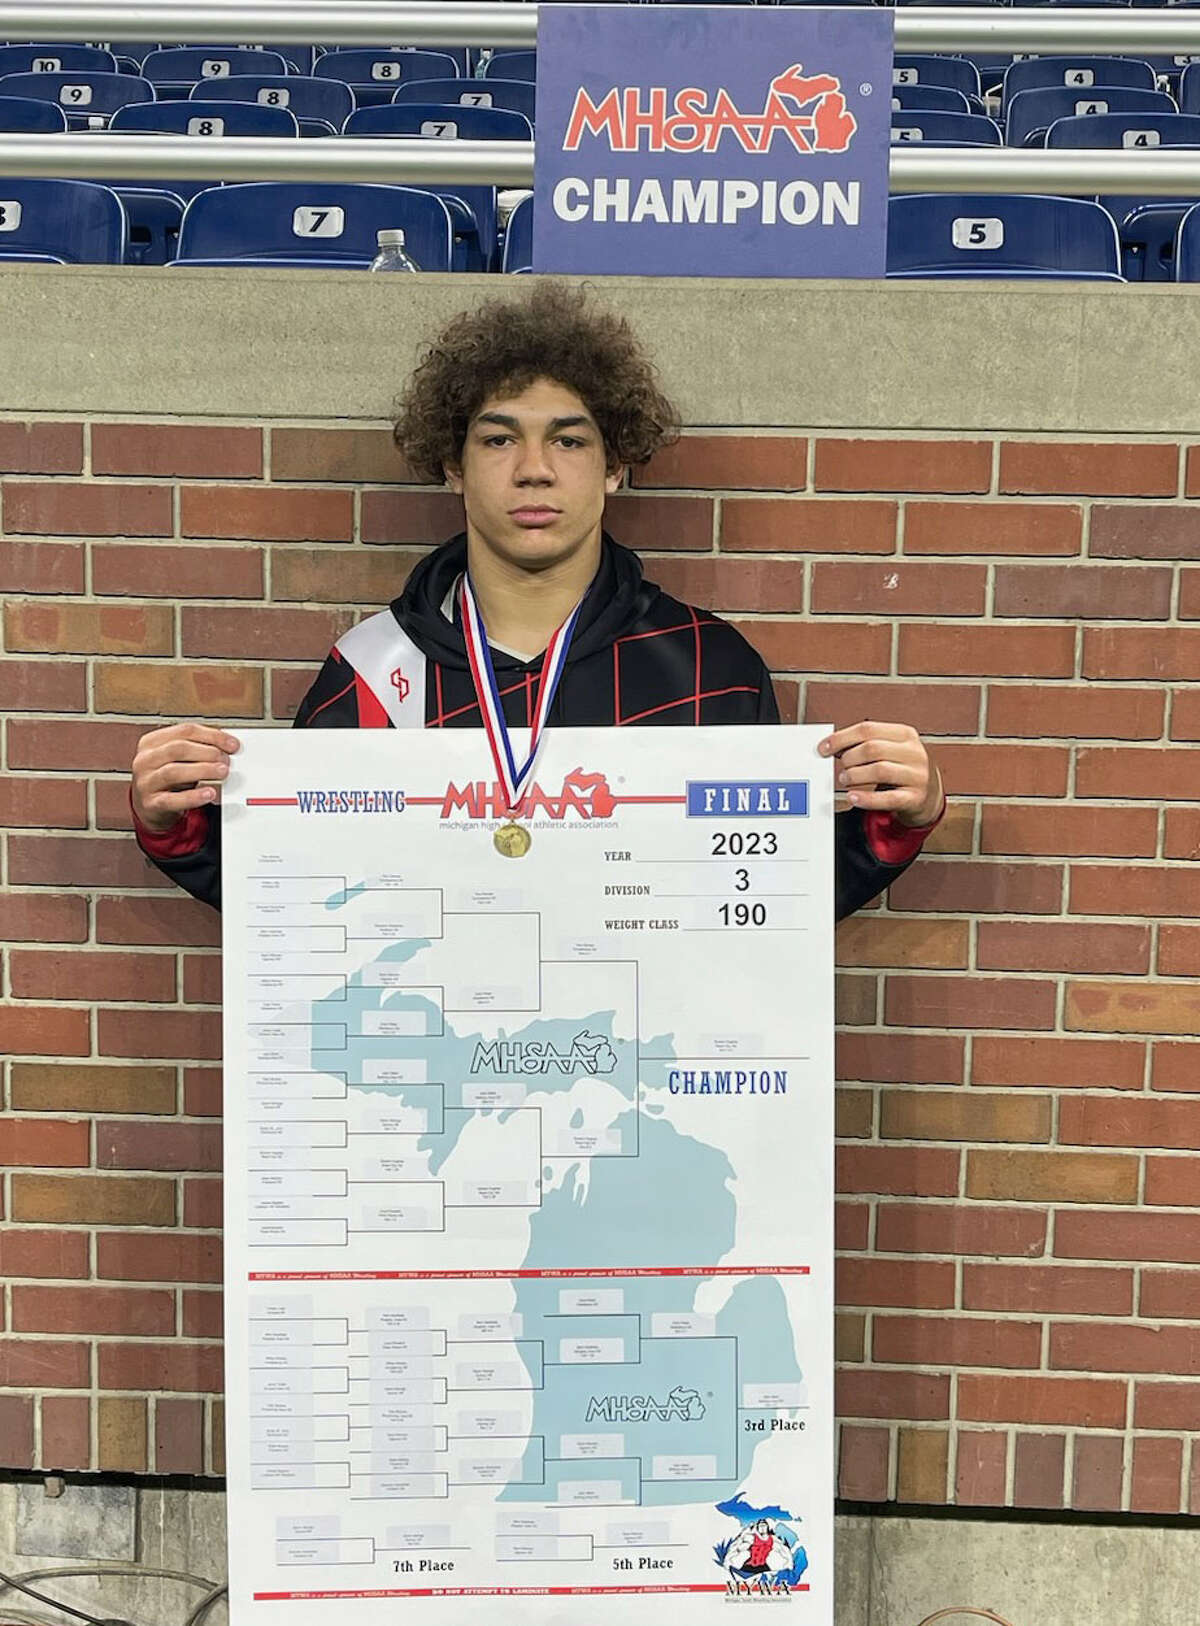 Reed City's Bryson Hughes displays his state championship medal and bracket poster at Ford Field on Saturday, March 4.